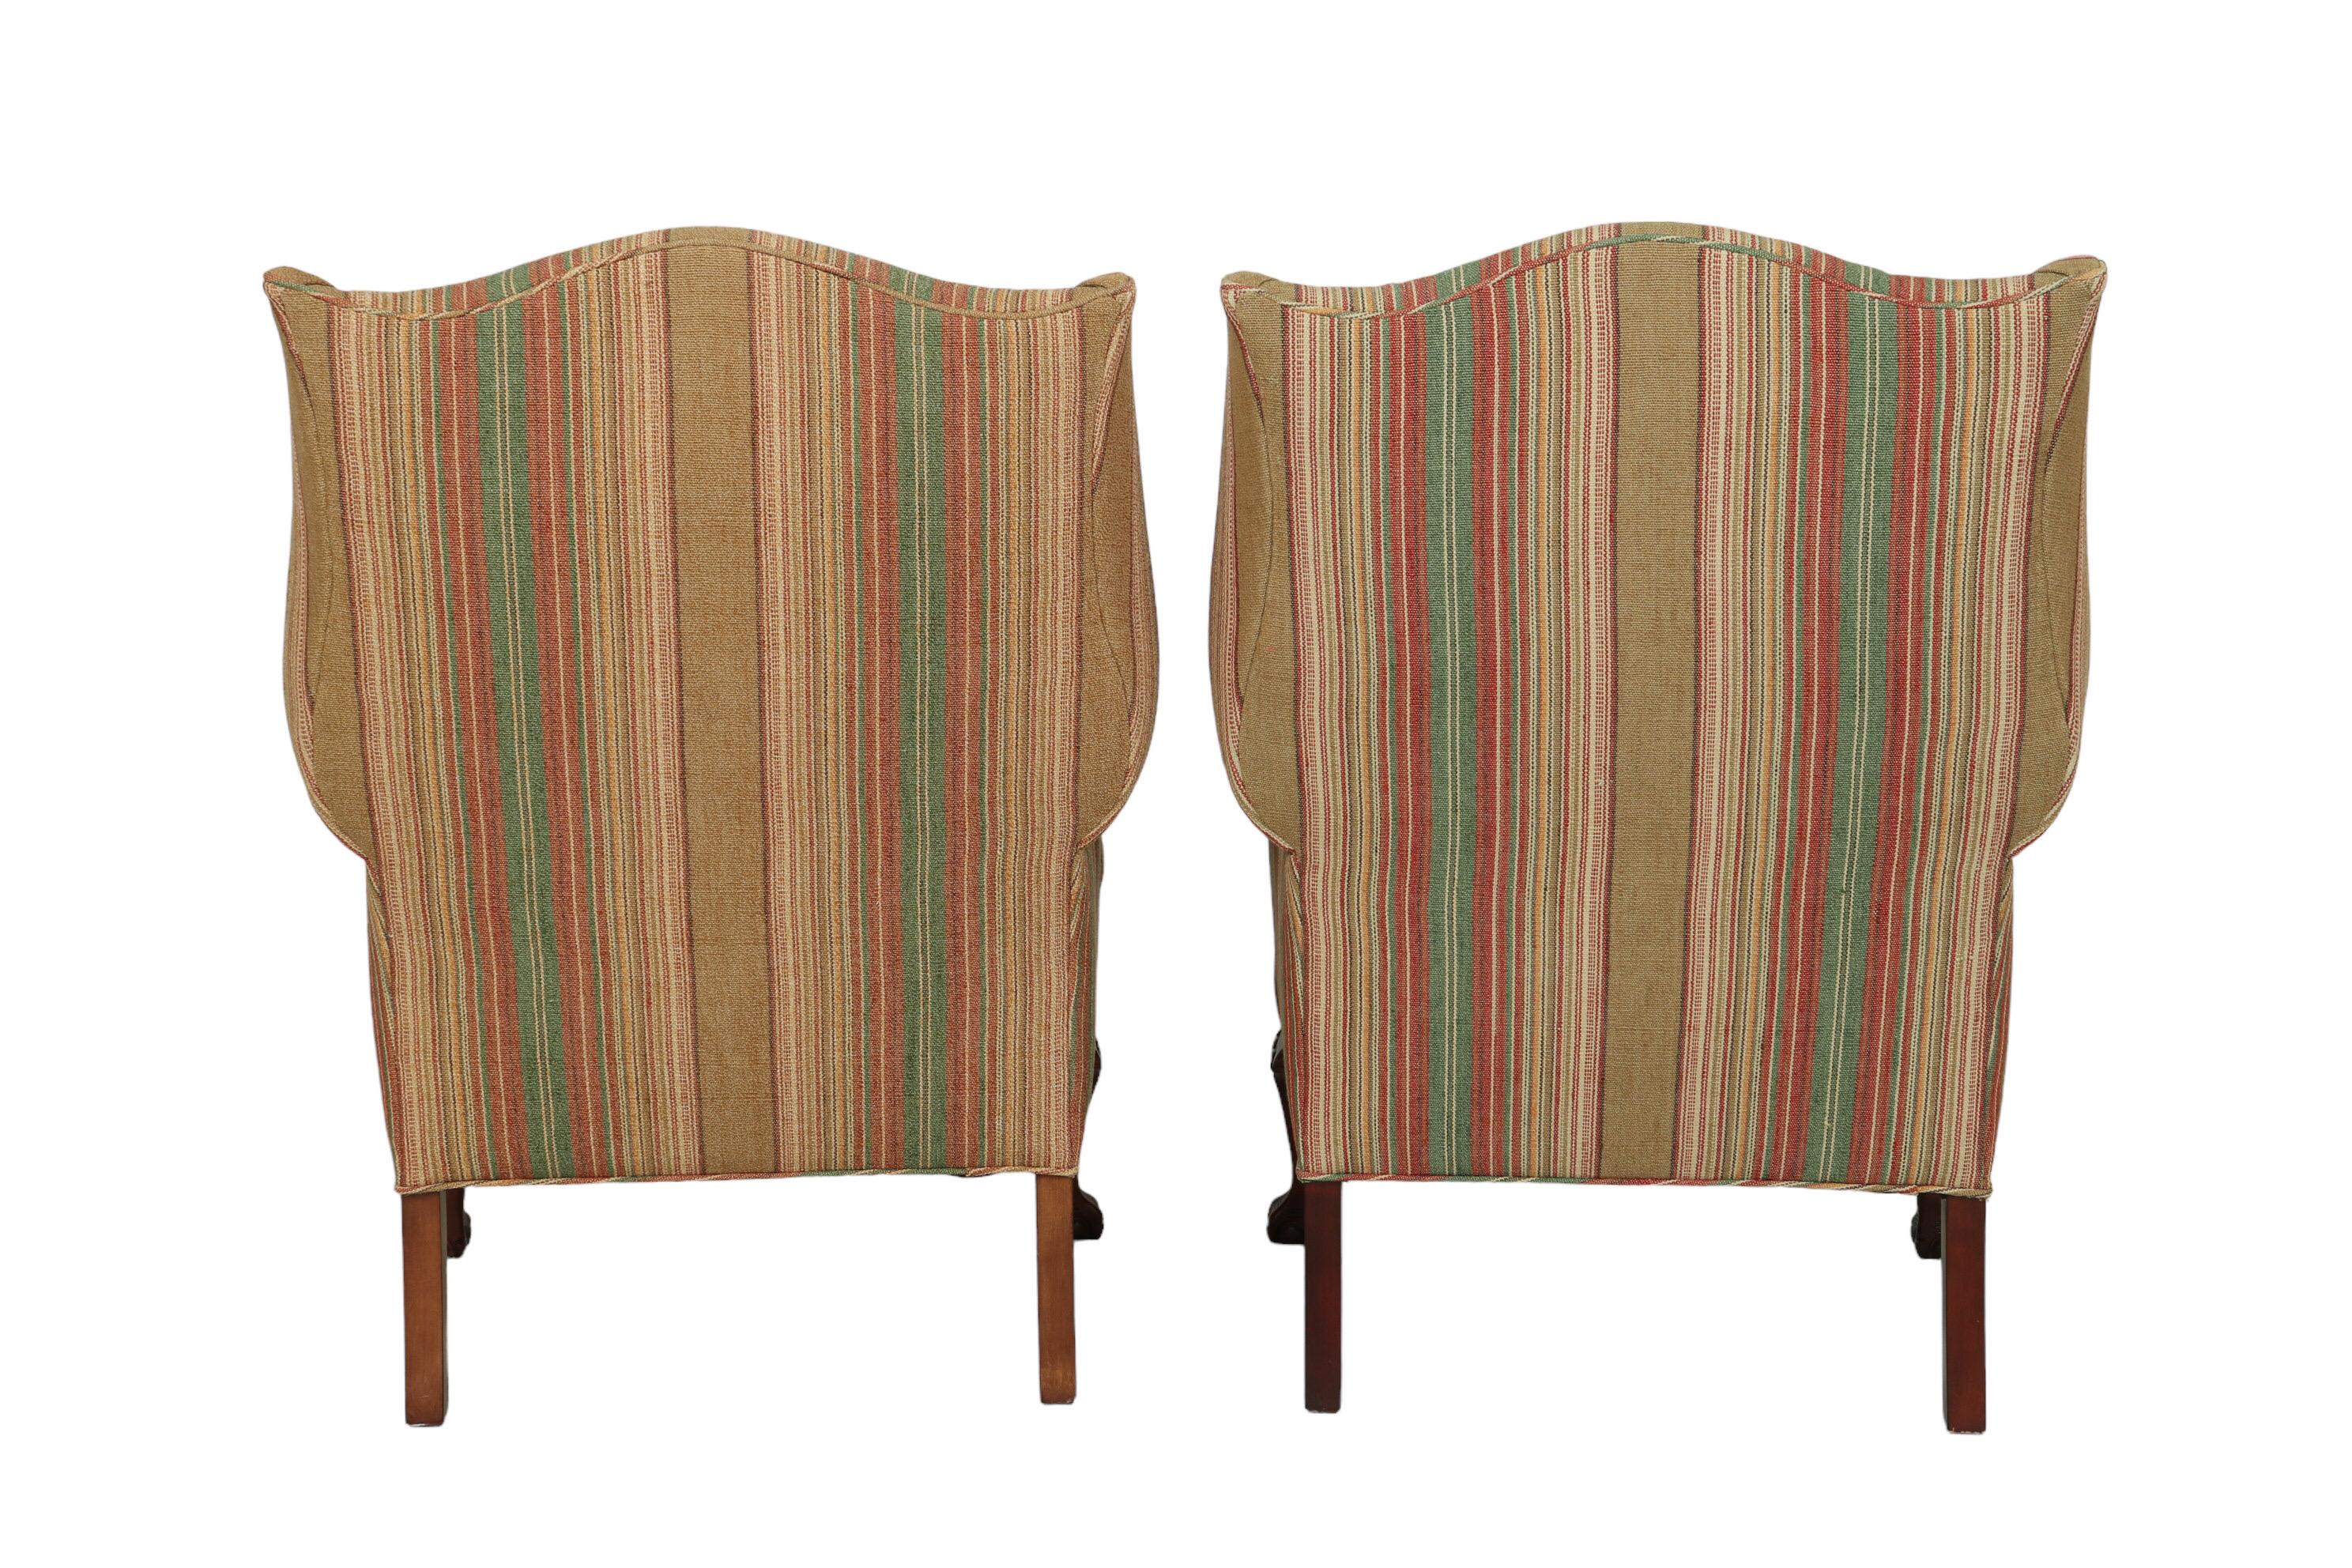 Rustic Chippendale Style Striped Wingback Chairs - a Pair